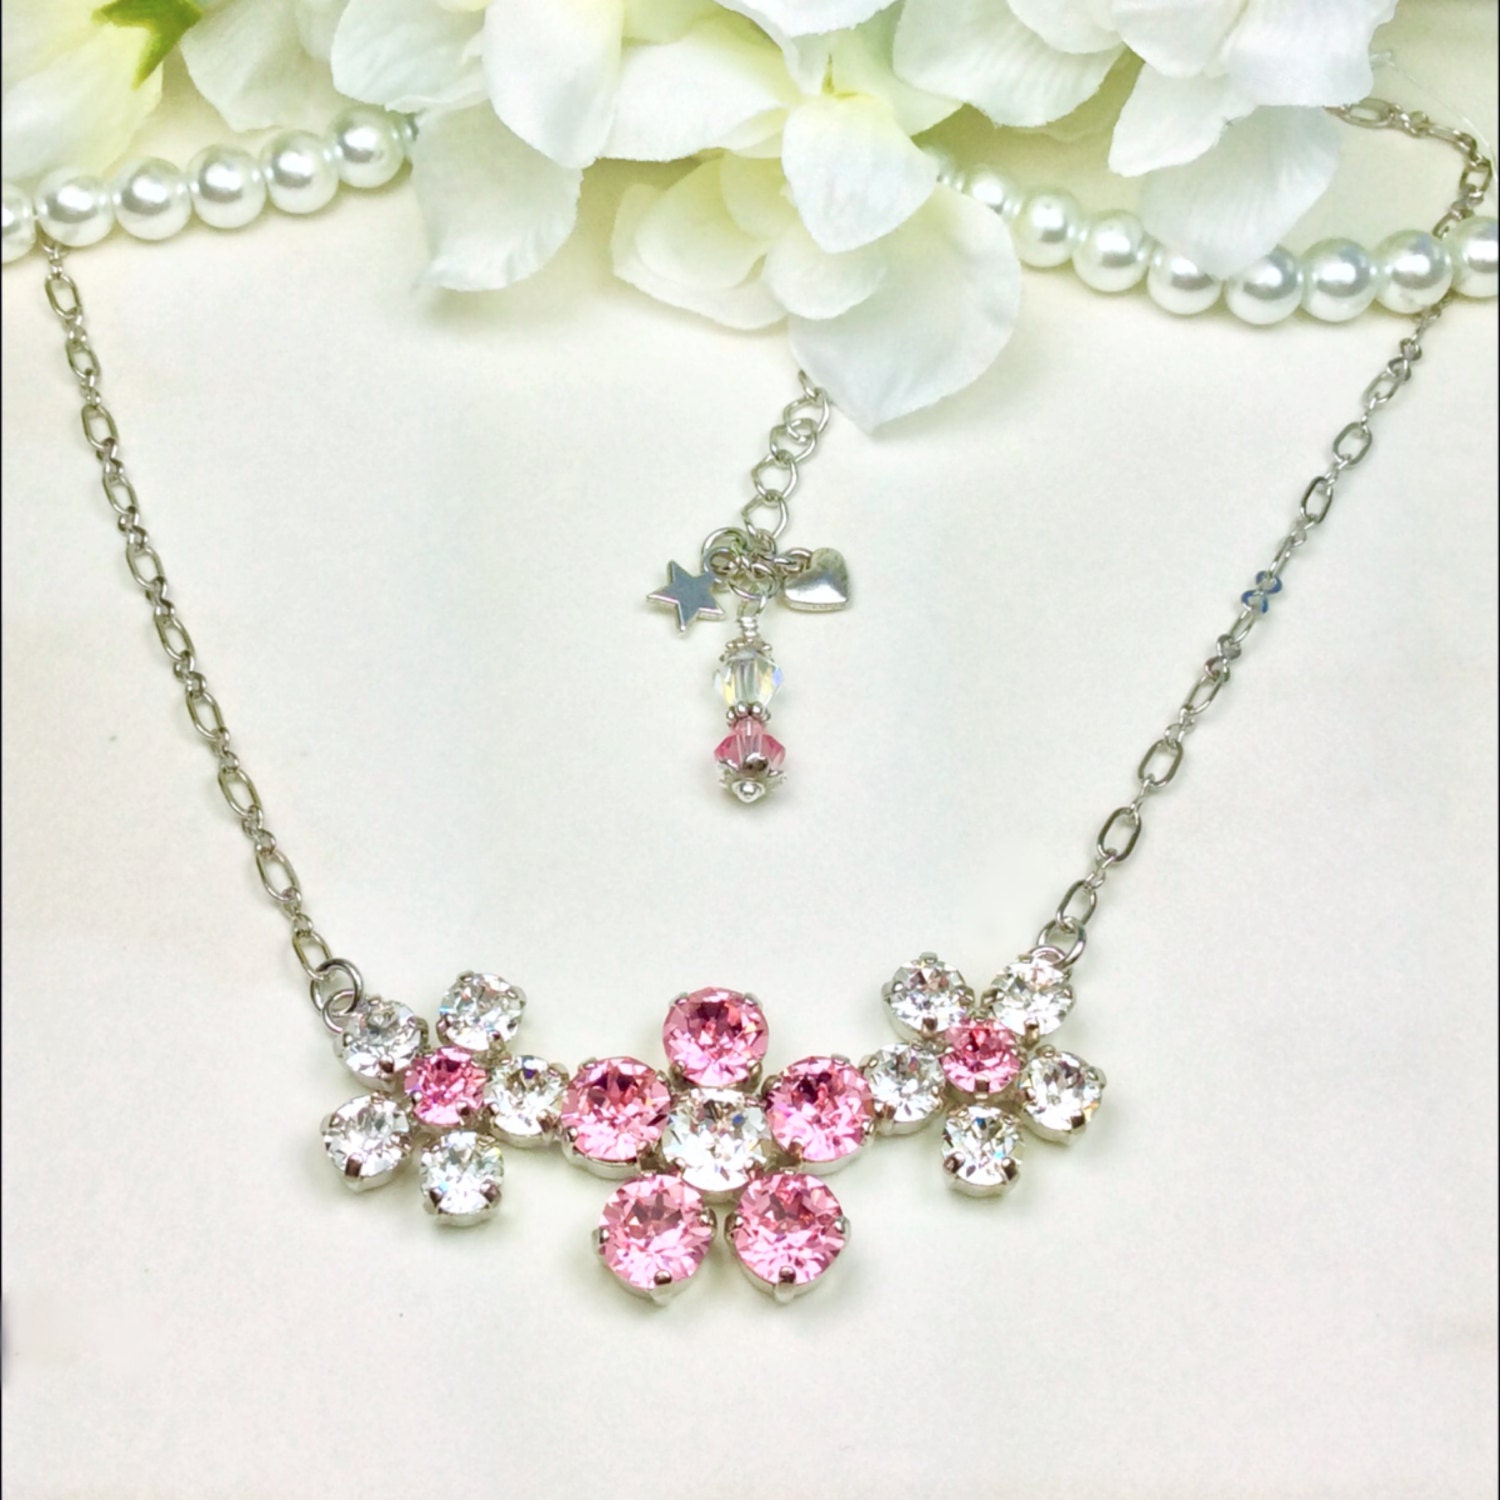 Swarovski Crystal Necklace - 8.5mm, 6mm - Lt.Rose and Clear Crystals -  Three Flower Pendant - Sparkle & Shimmer - FREE SHIPPING